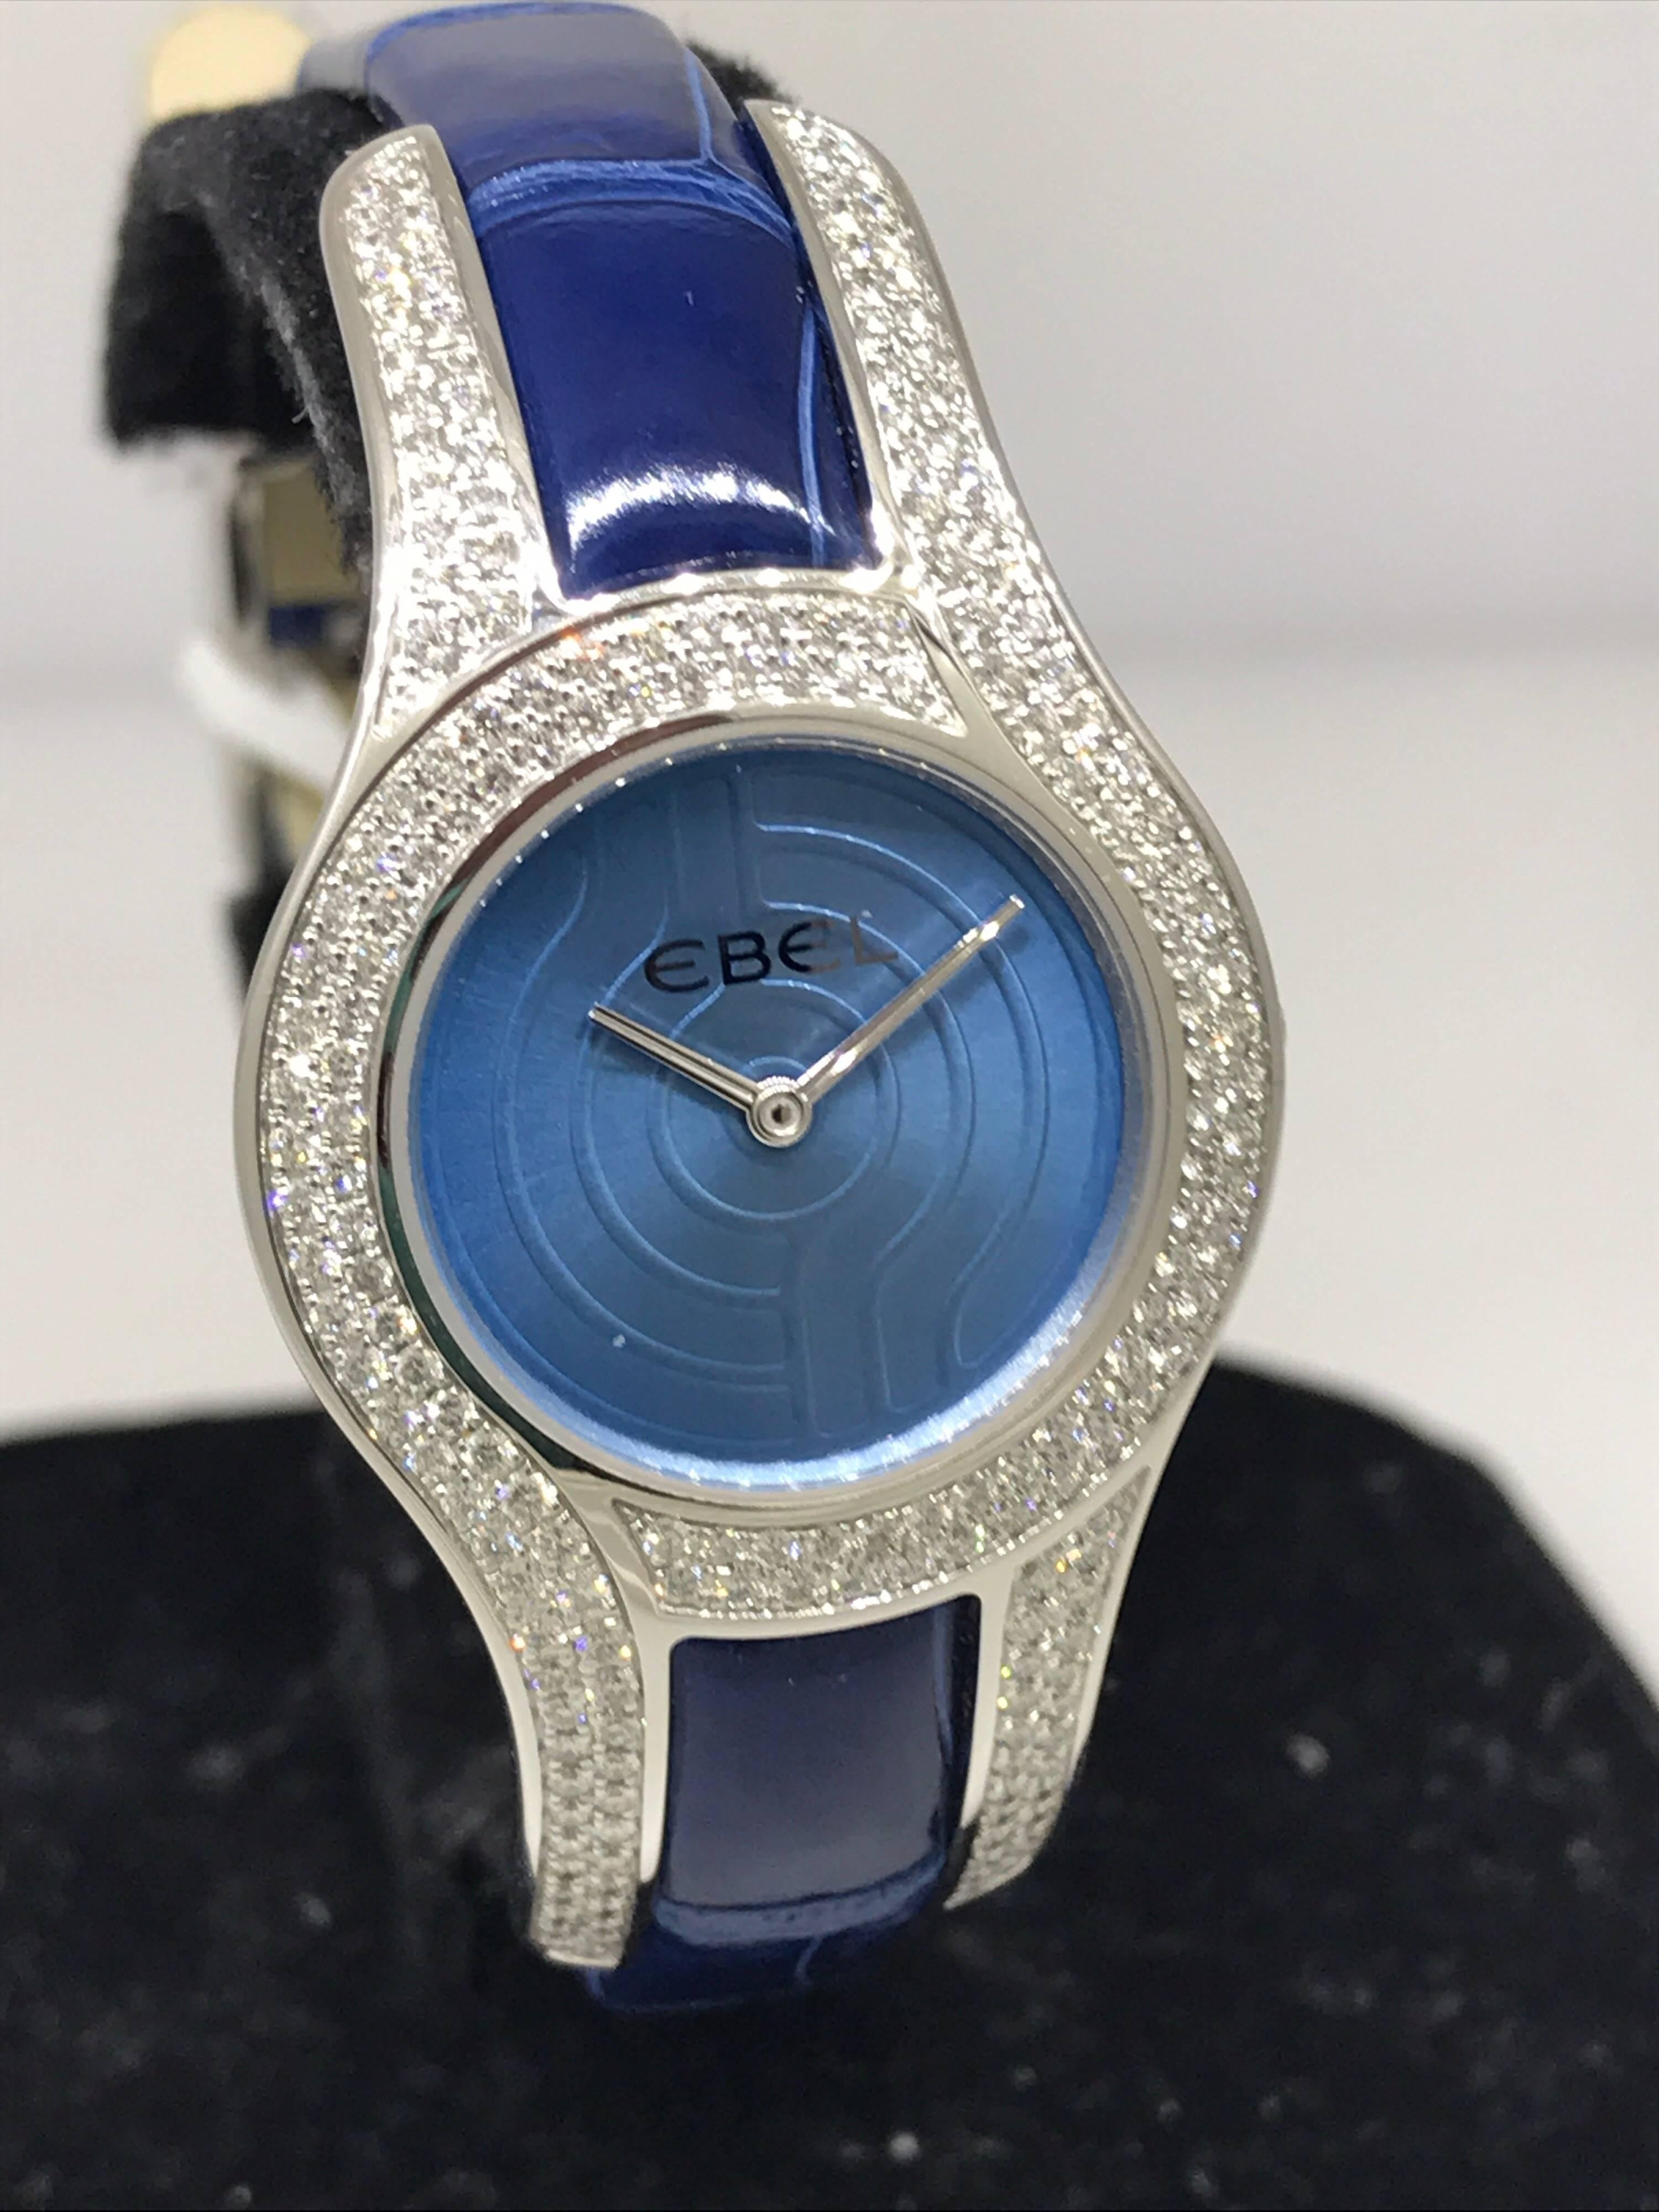 Ebel Midnight Moonchic White Gold Diamond Leather Band Ladies Watch

Model Number: 3157H29

100% Authentic

Brand New

Comes with original Ebel box, warranty card and instruction manual

18 Karat White Gold Case 

Bezel set with 198 Diamonds (1.60